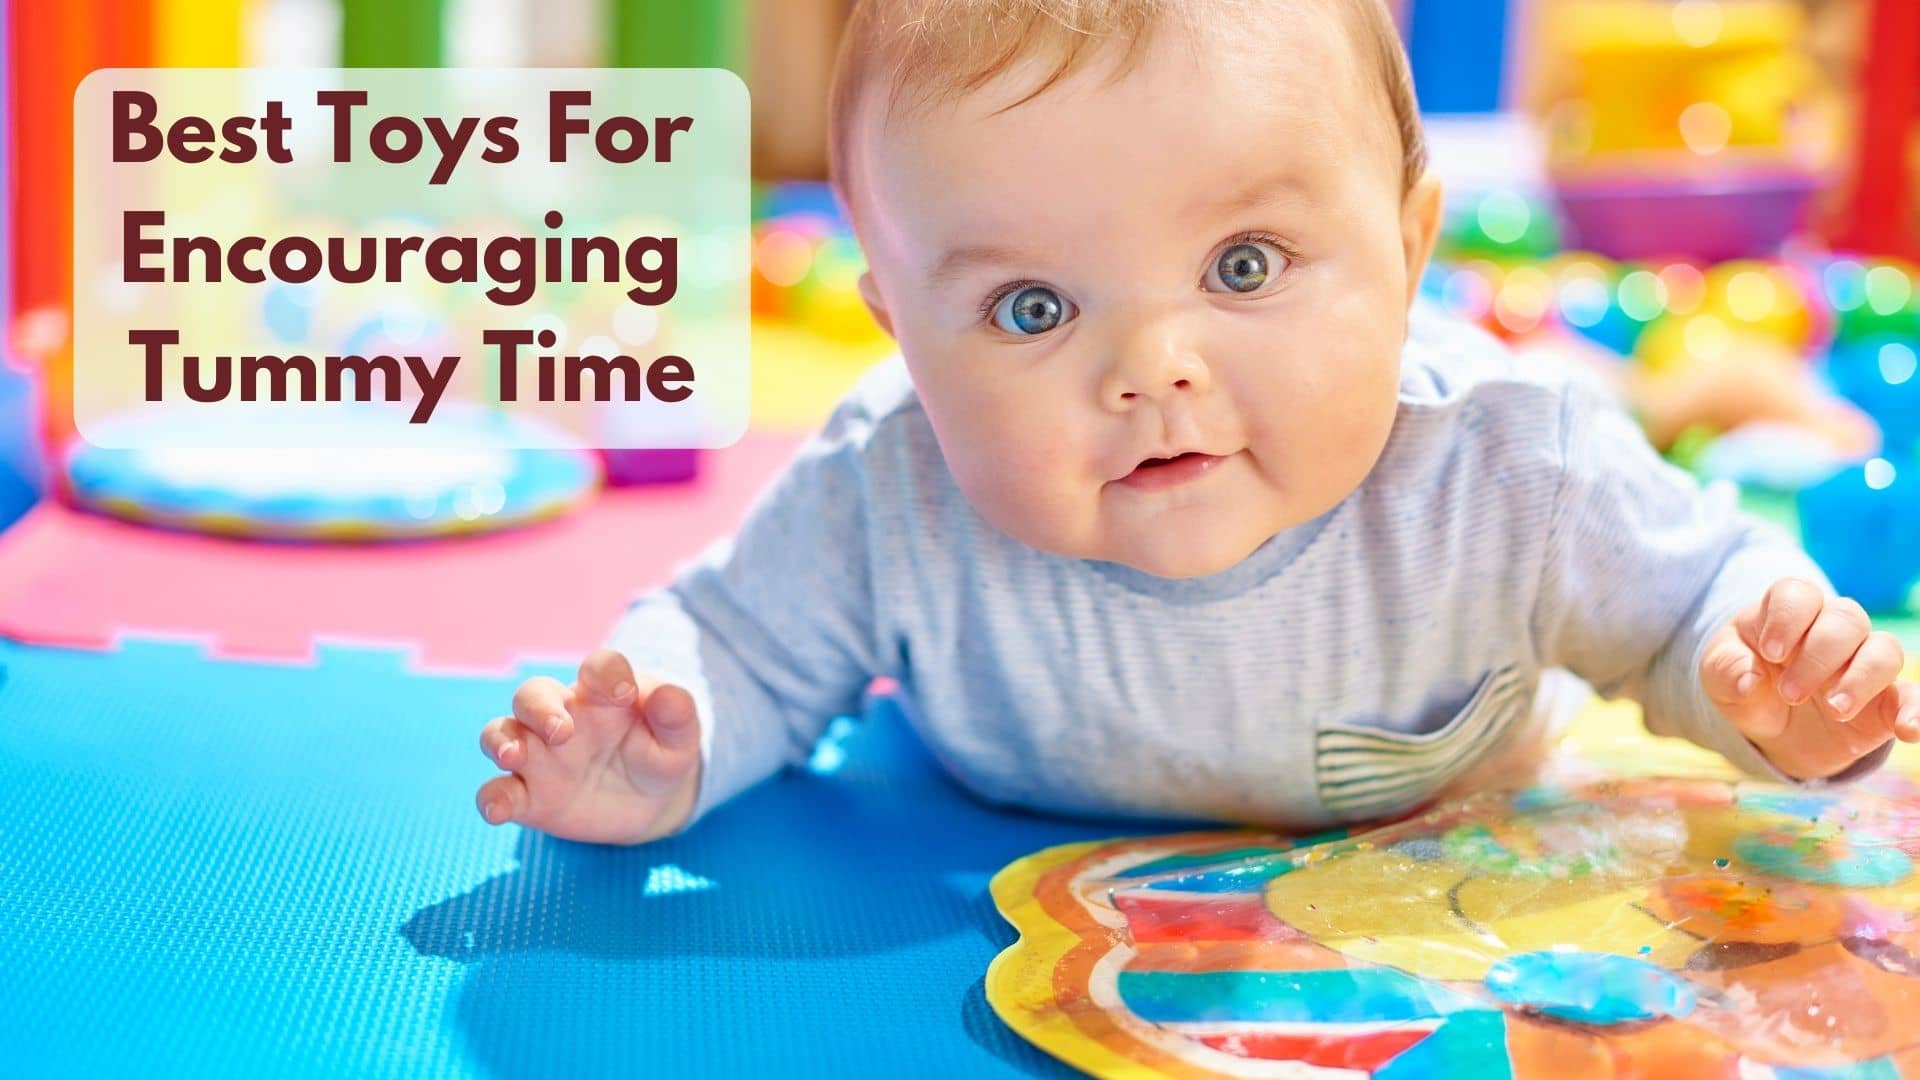 What Are The Best Toys For Encouraging Tummy Time?